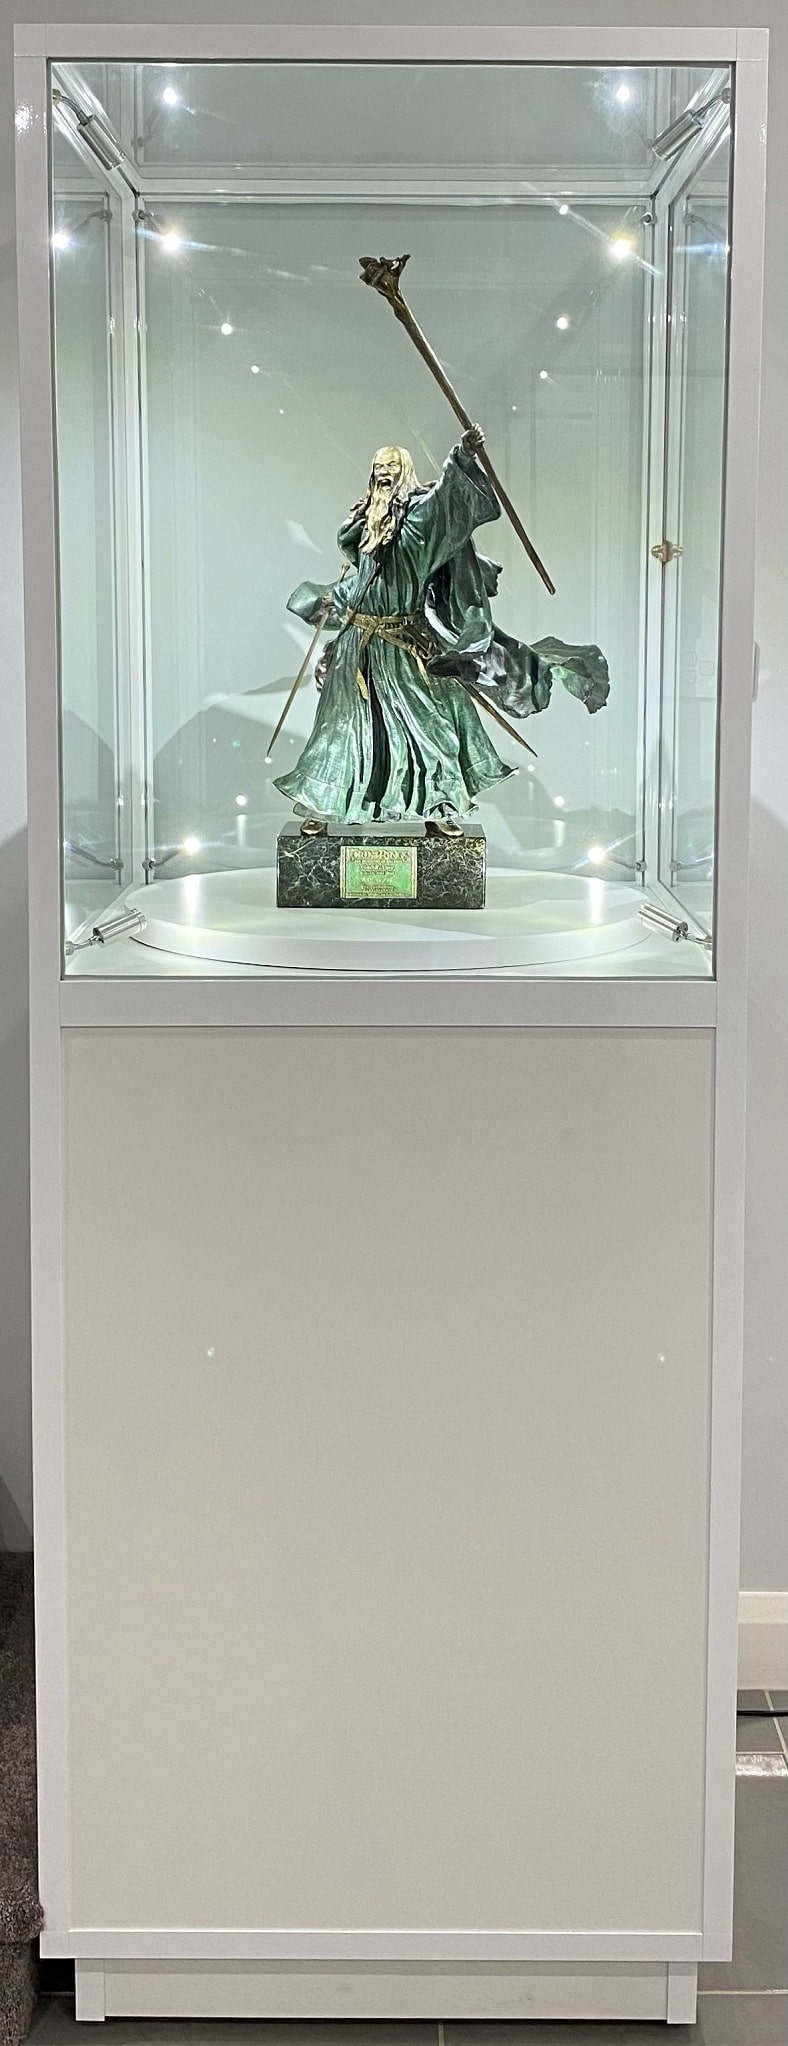 LOTR CBDL pedestal display case from Showfront 